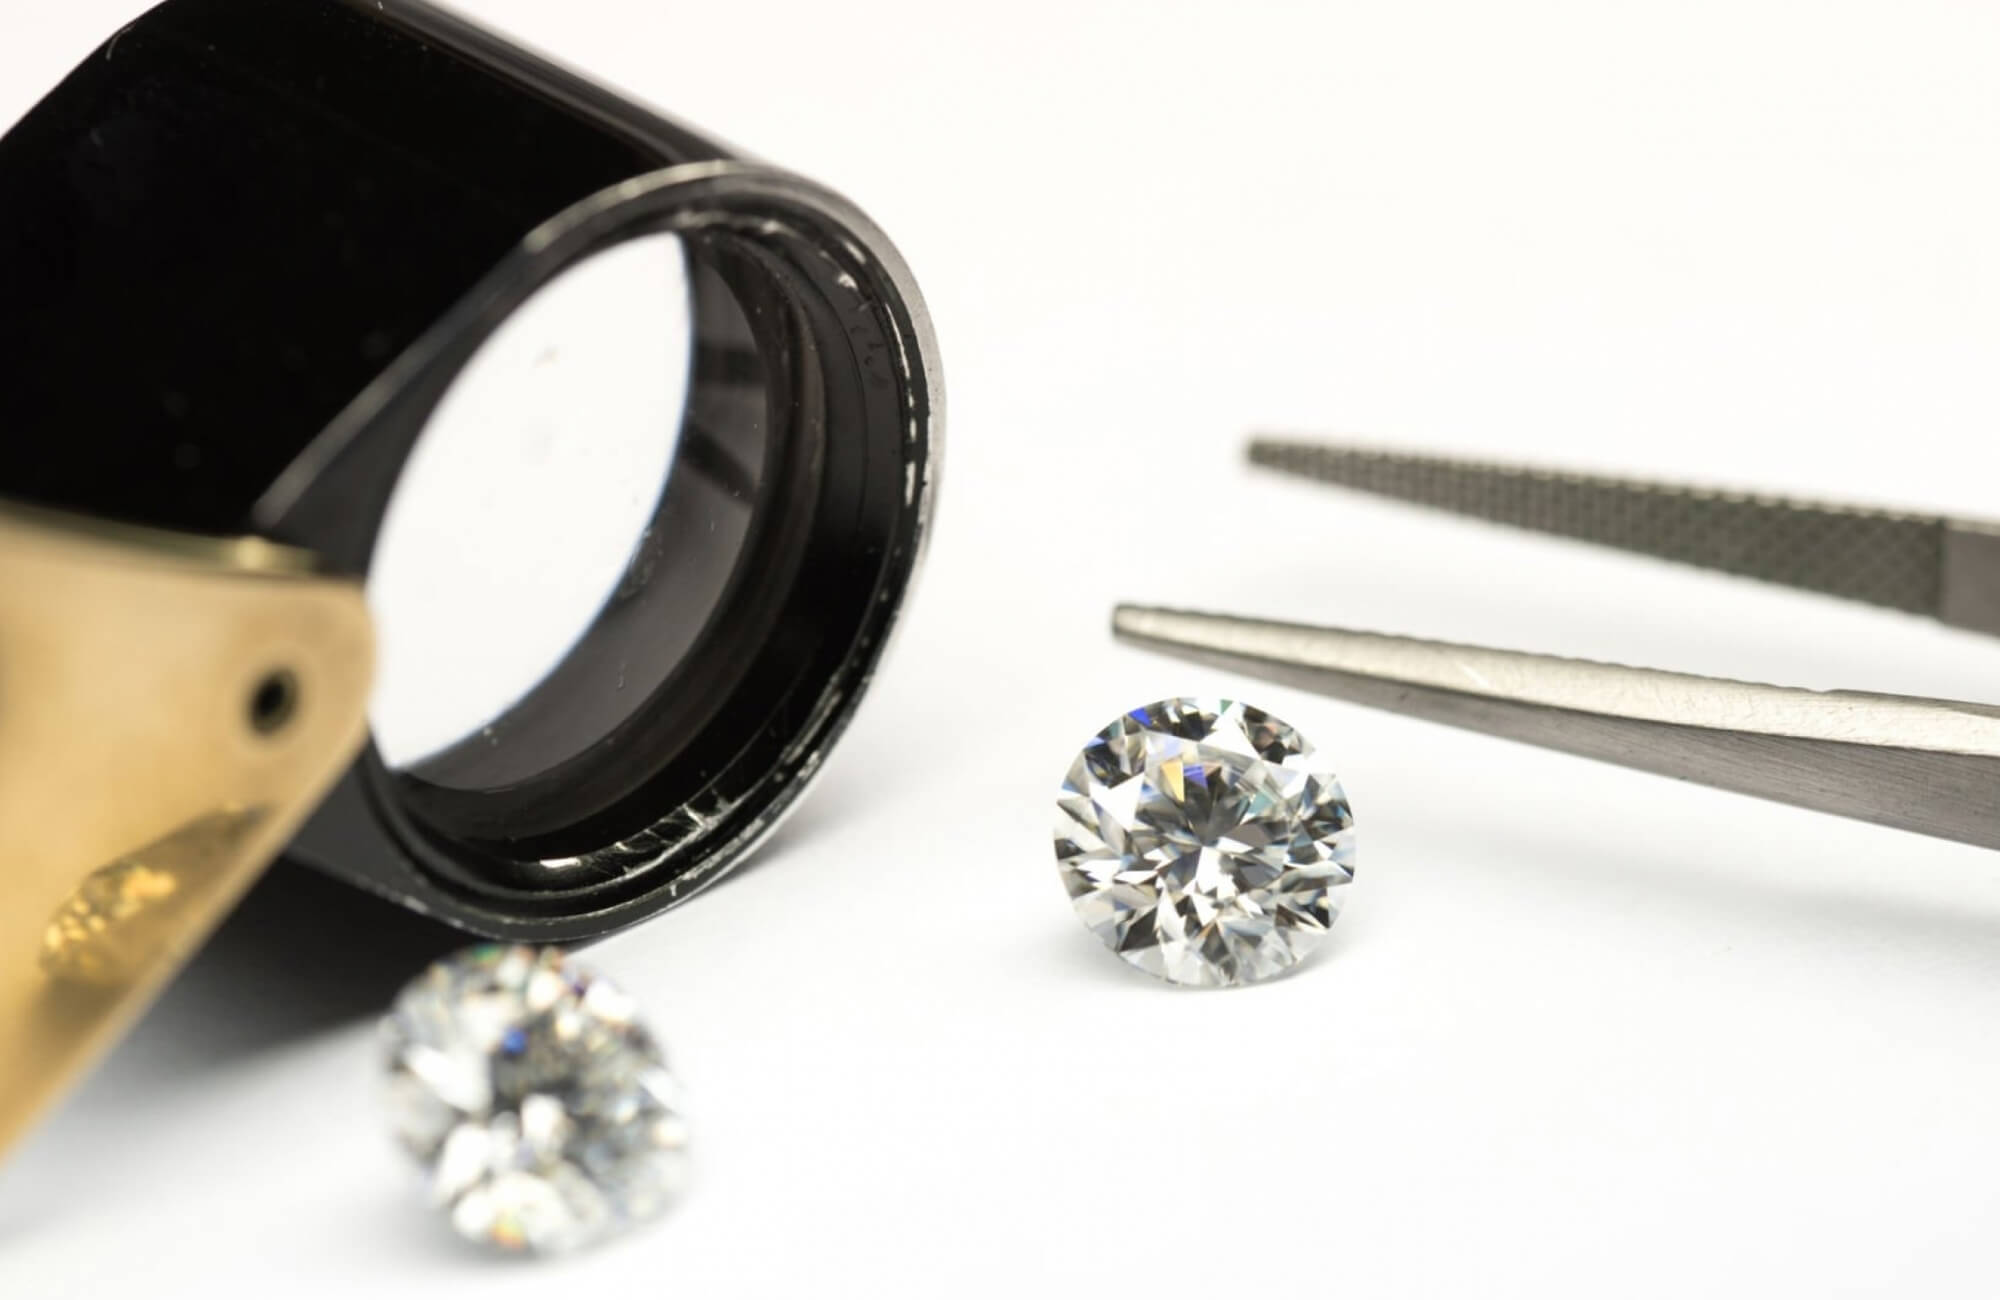 Can a jeweller tell if a diamond is lab grown